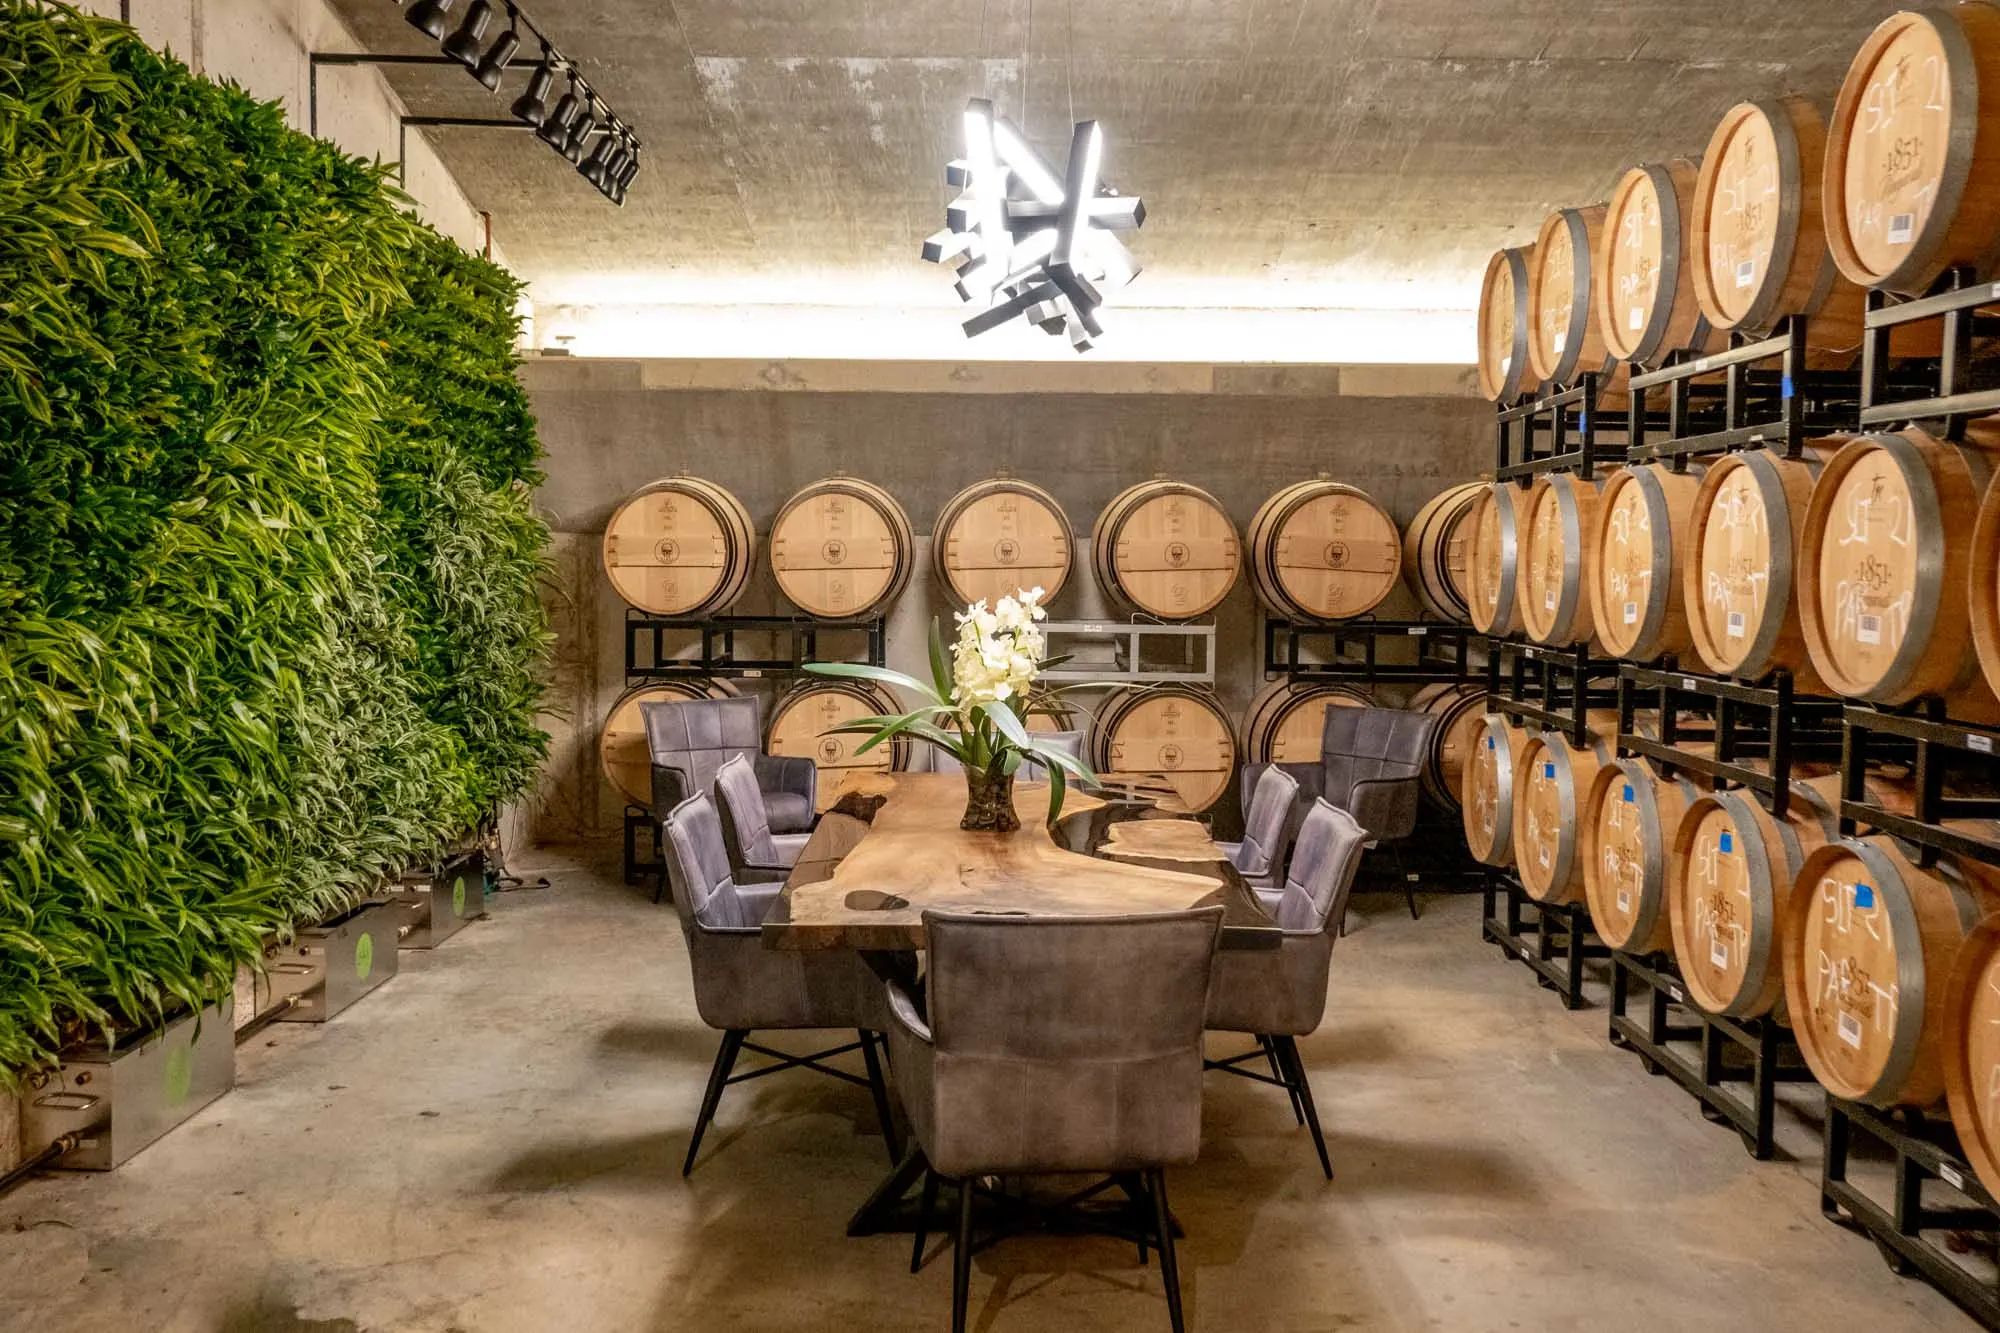 Table in the middle of a room lined with wine barrels and plants